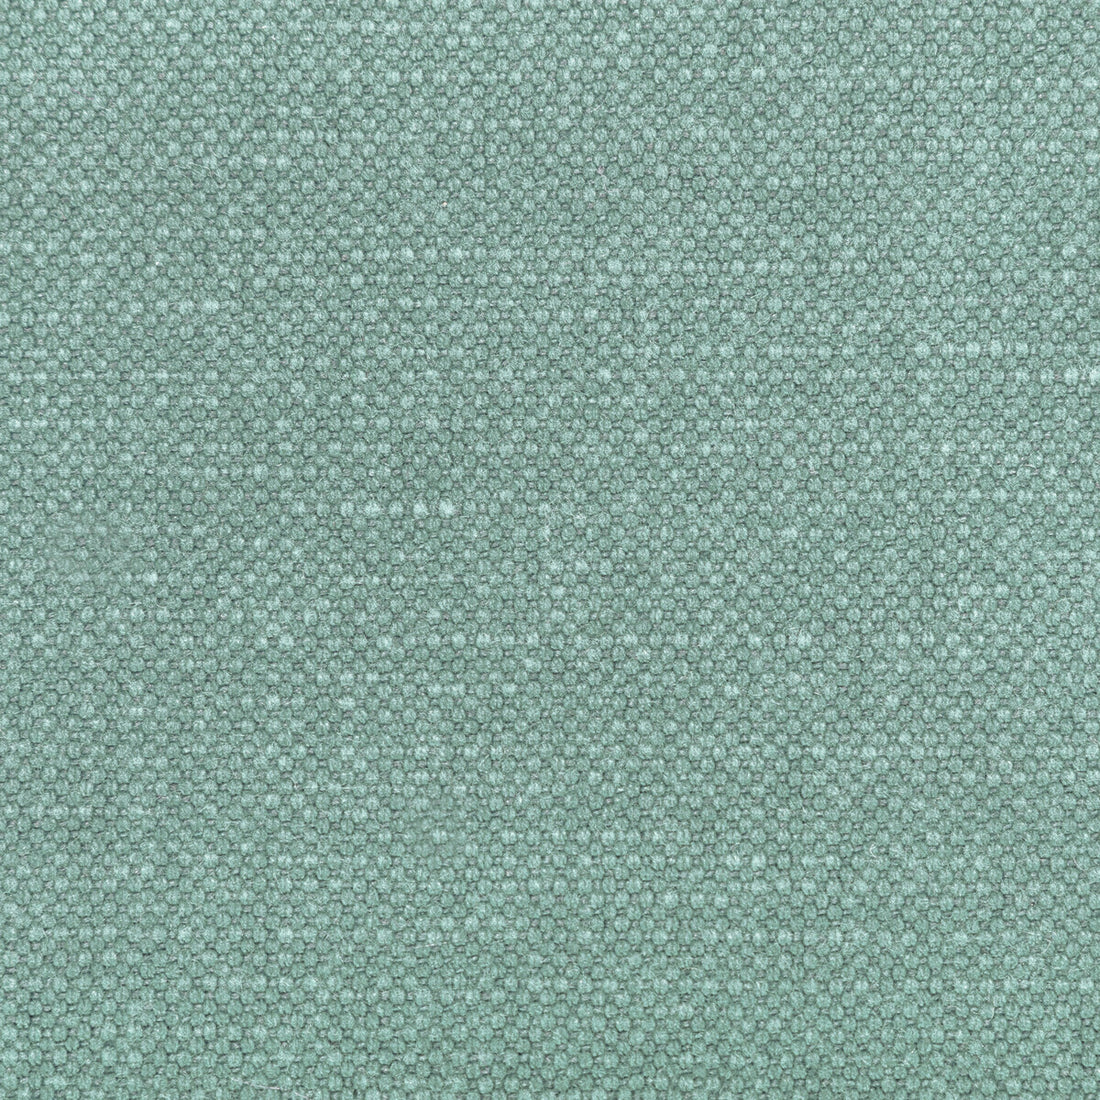 Carson fabric in jade color - pattern 36282.1311.0 - by Kravet Basics